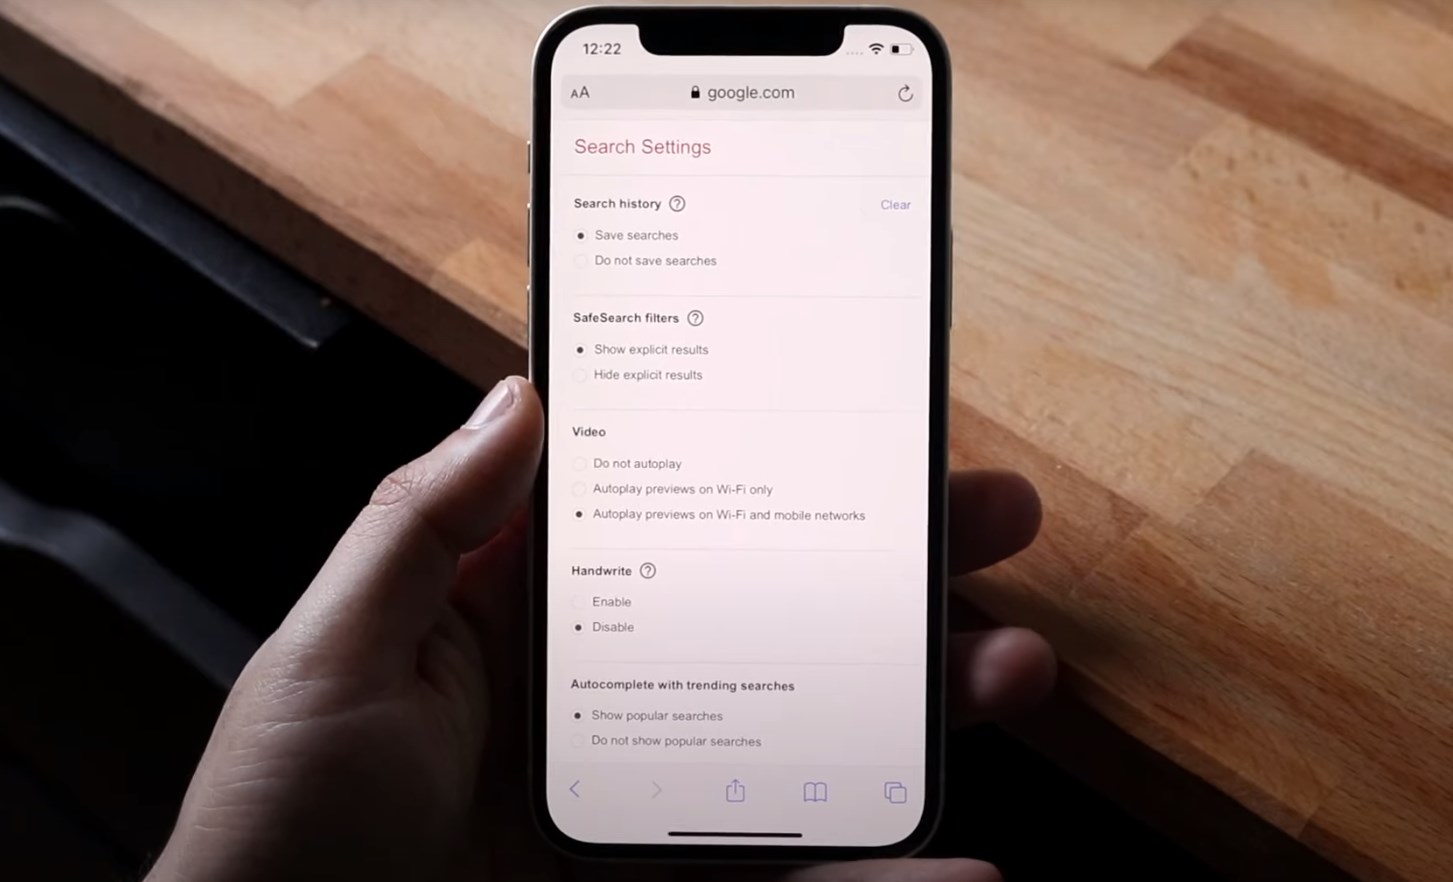 Google’s Search Settings on the iPhone screen